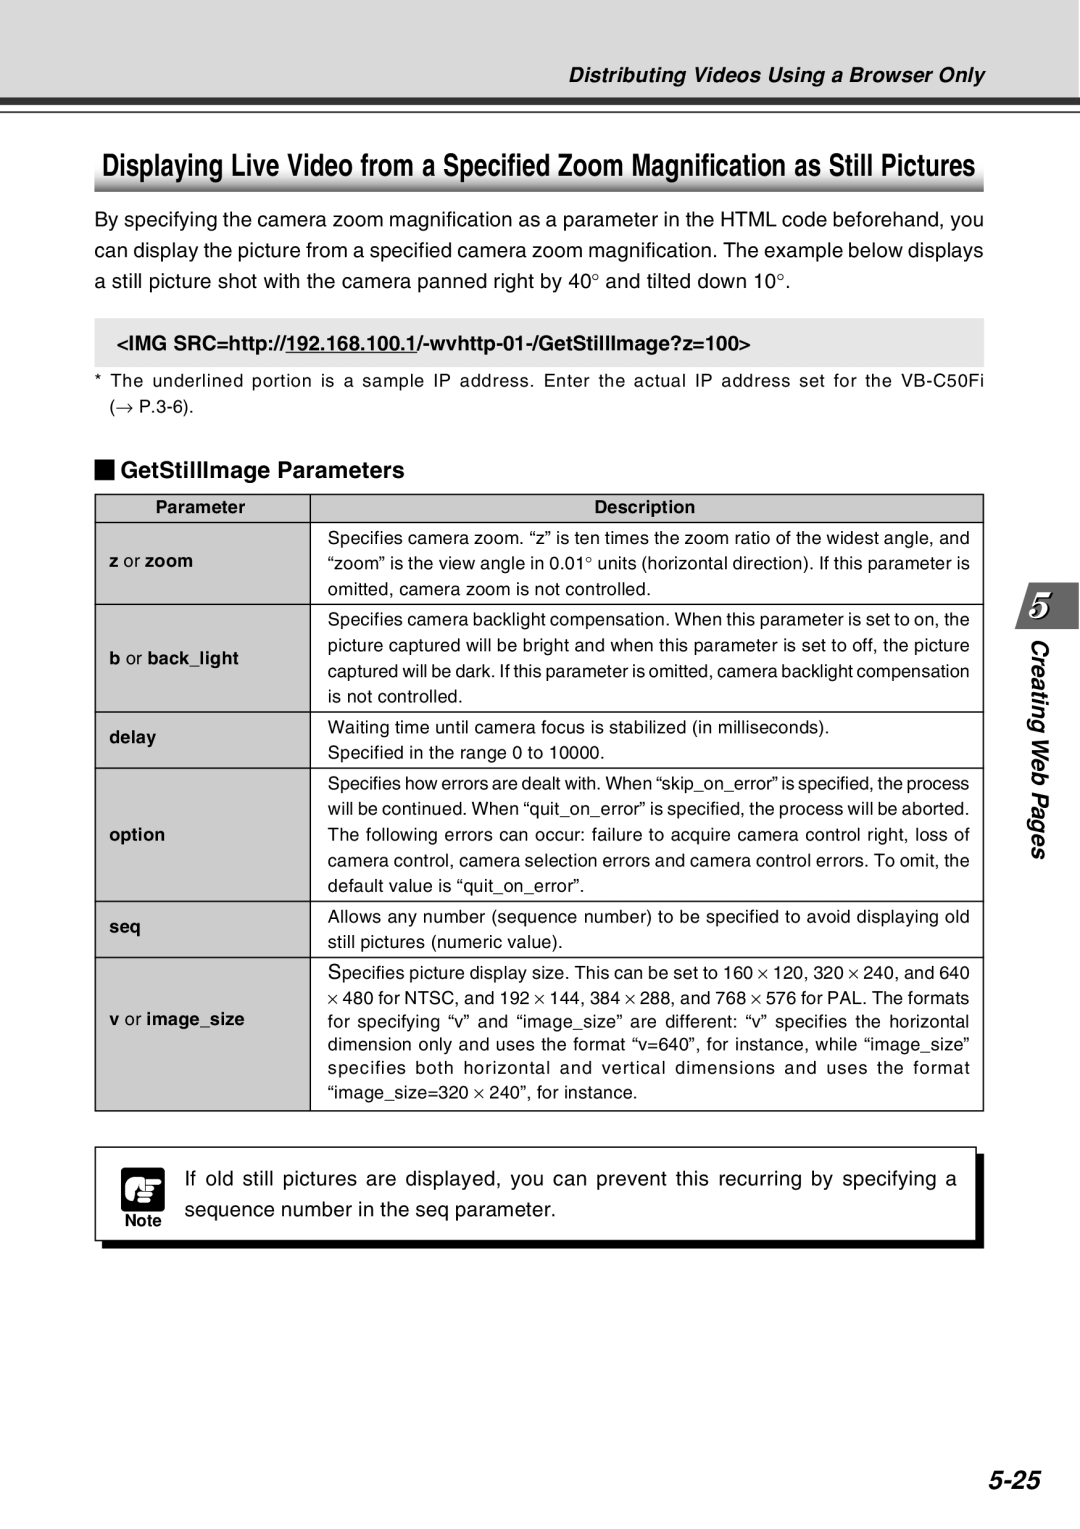 Canon Vb-C50fi user manual 5-25, GetStillImage Parameters, Creating Web Pages, Distributing Videos Using a Browser Only 